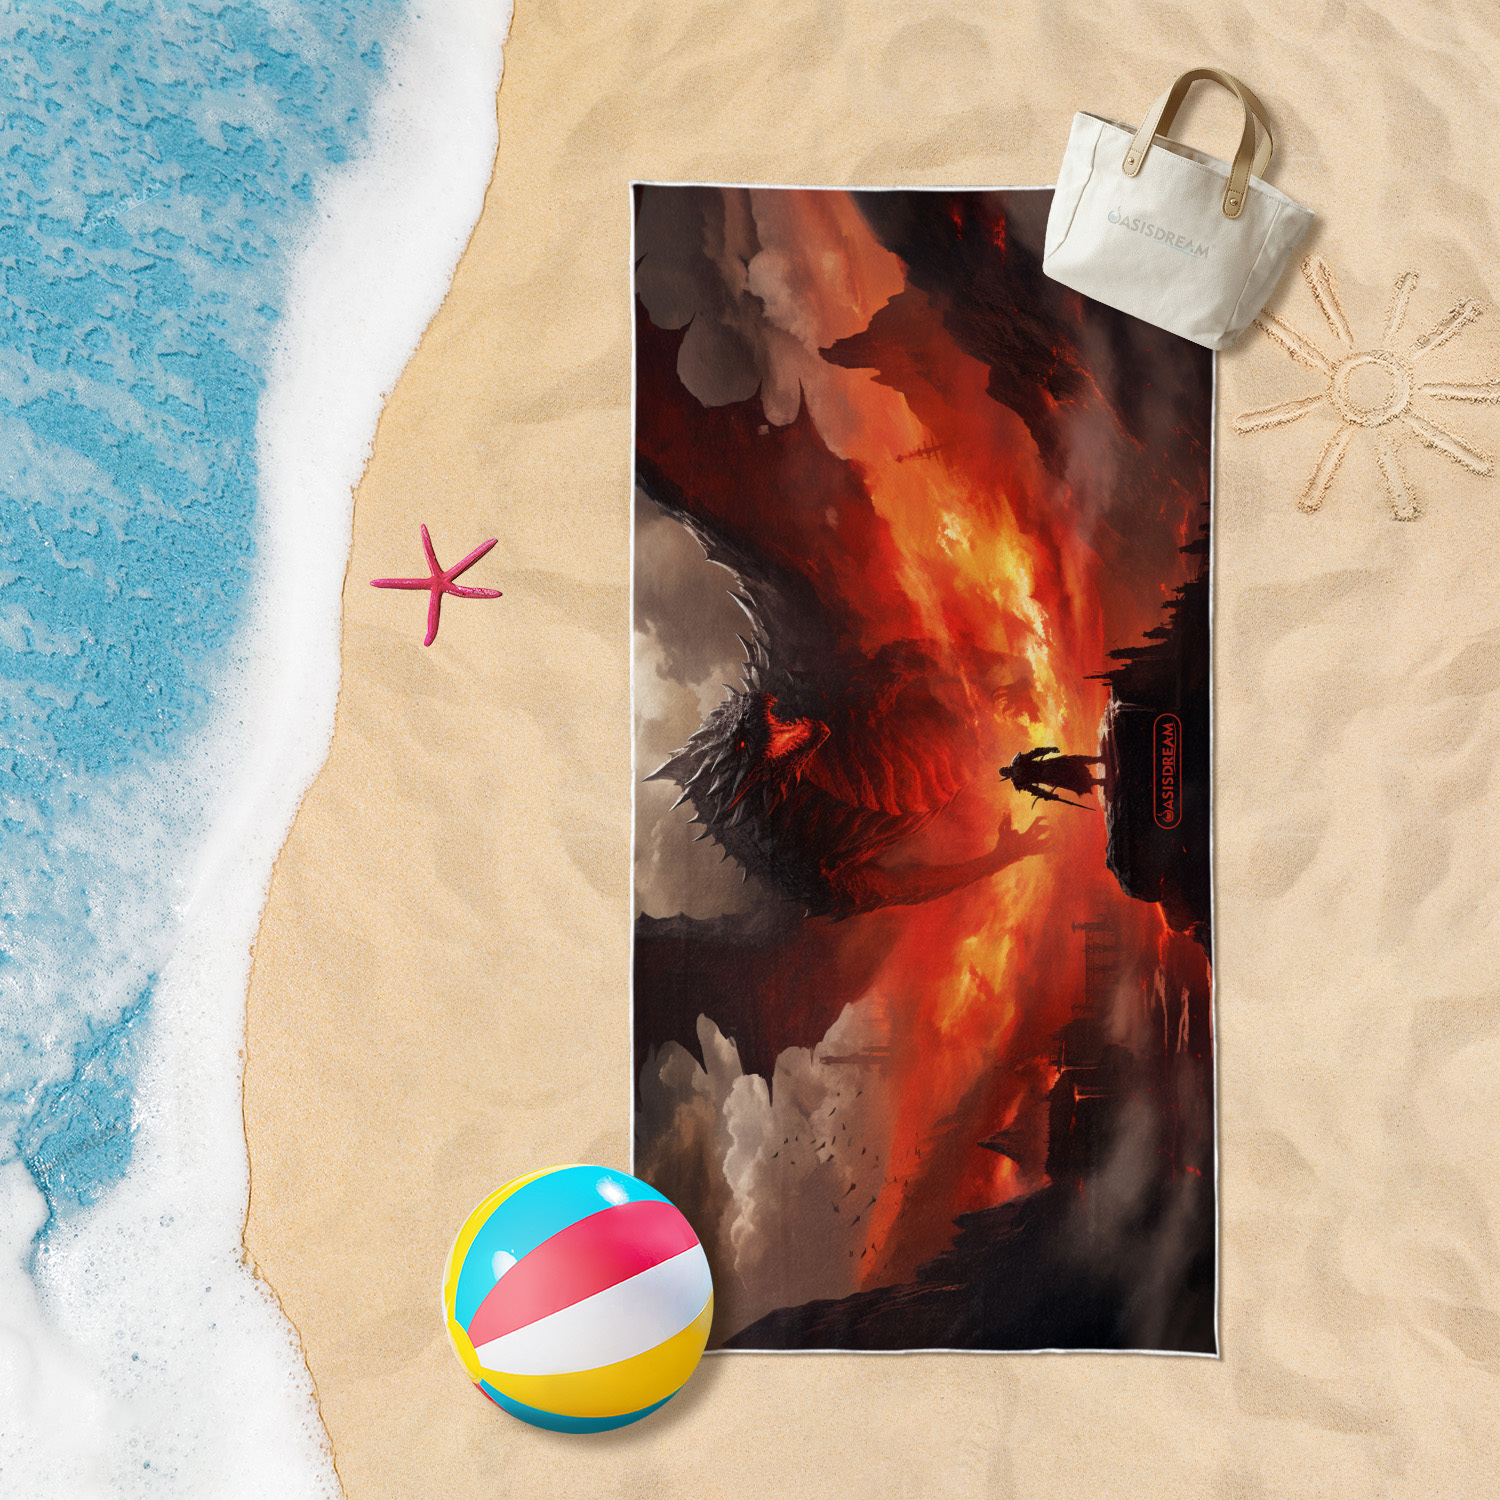 

1pc Dragon Fire Beach Towel, Oversized Pool Towel Sand-free Beach Towel, Quick Drying, Super Absorbent, Soft Breathable Blanket (59"x 29.5"/150cmx75cm)